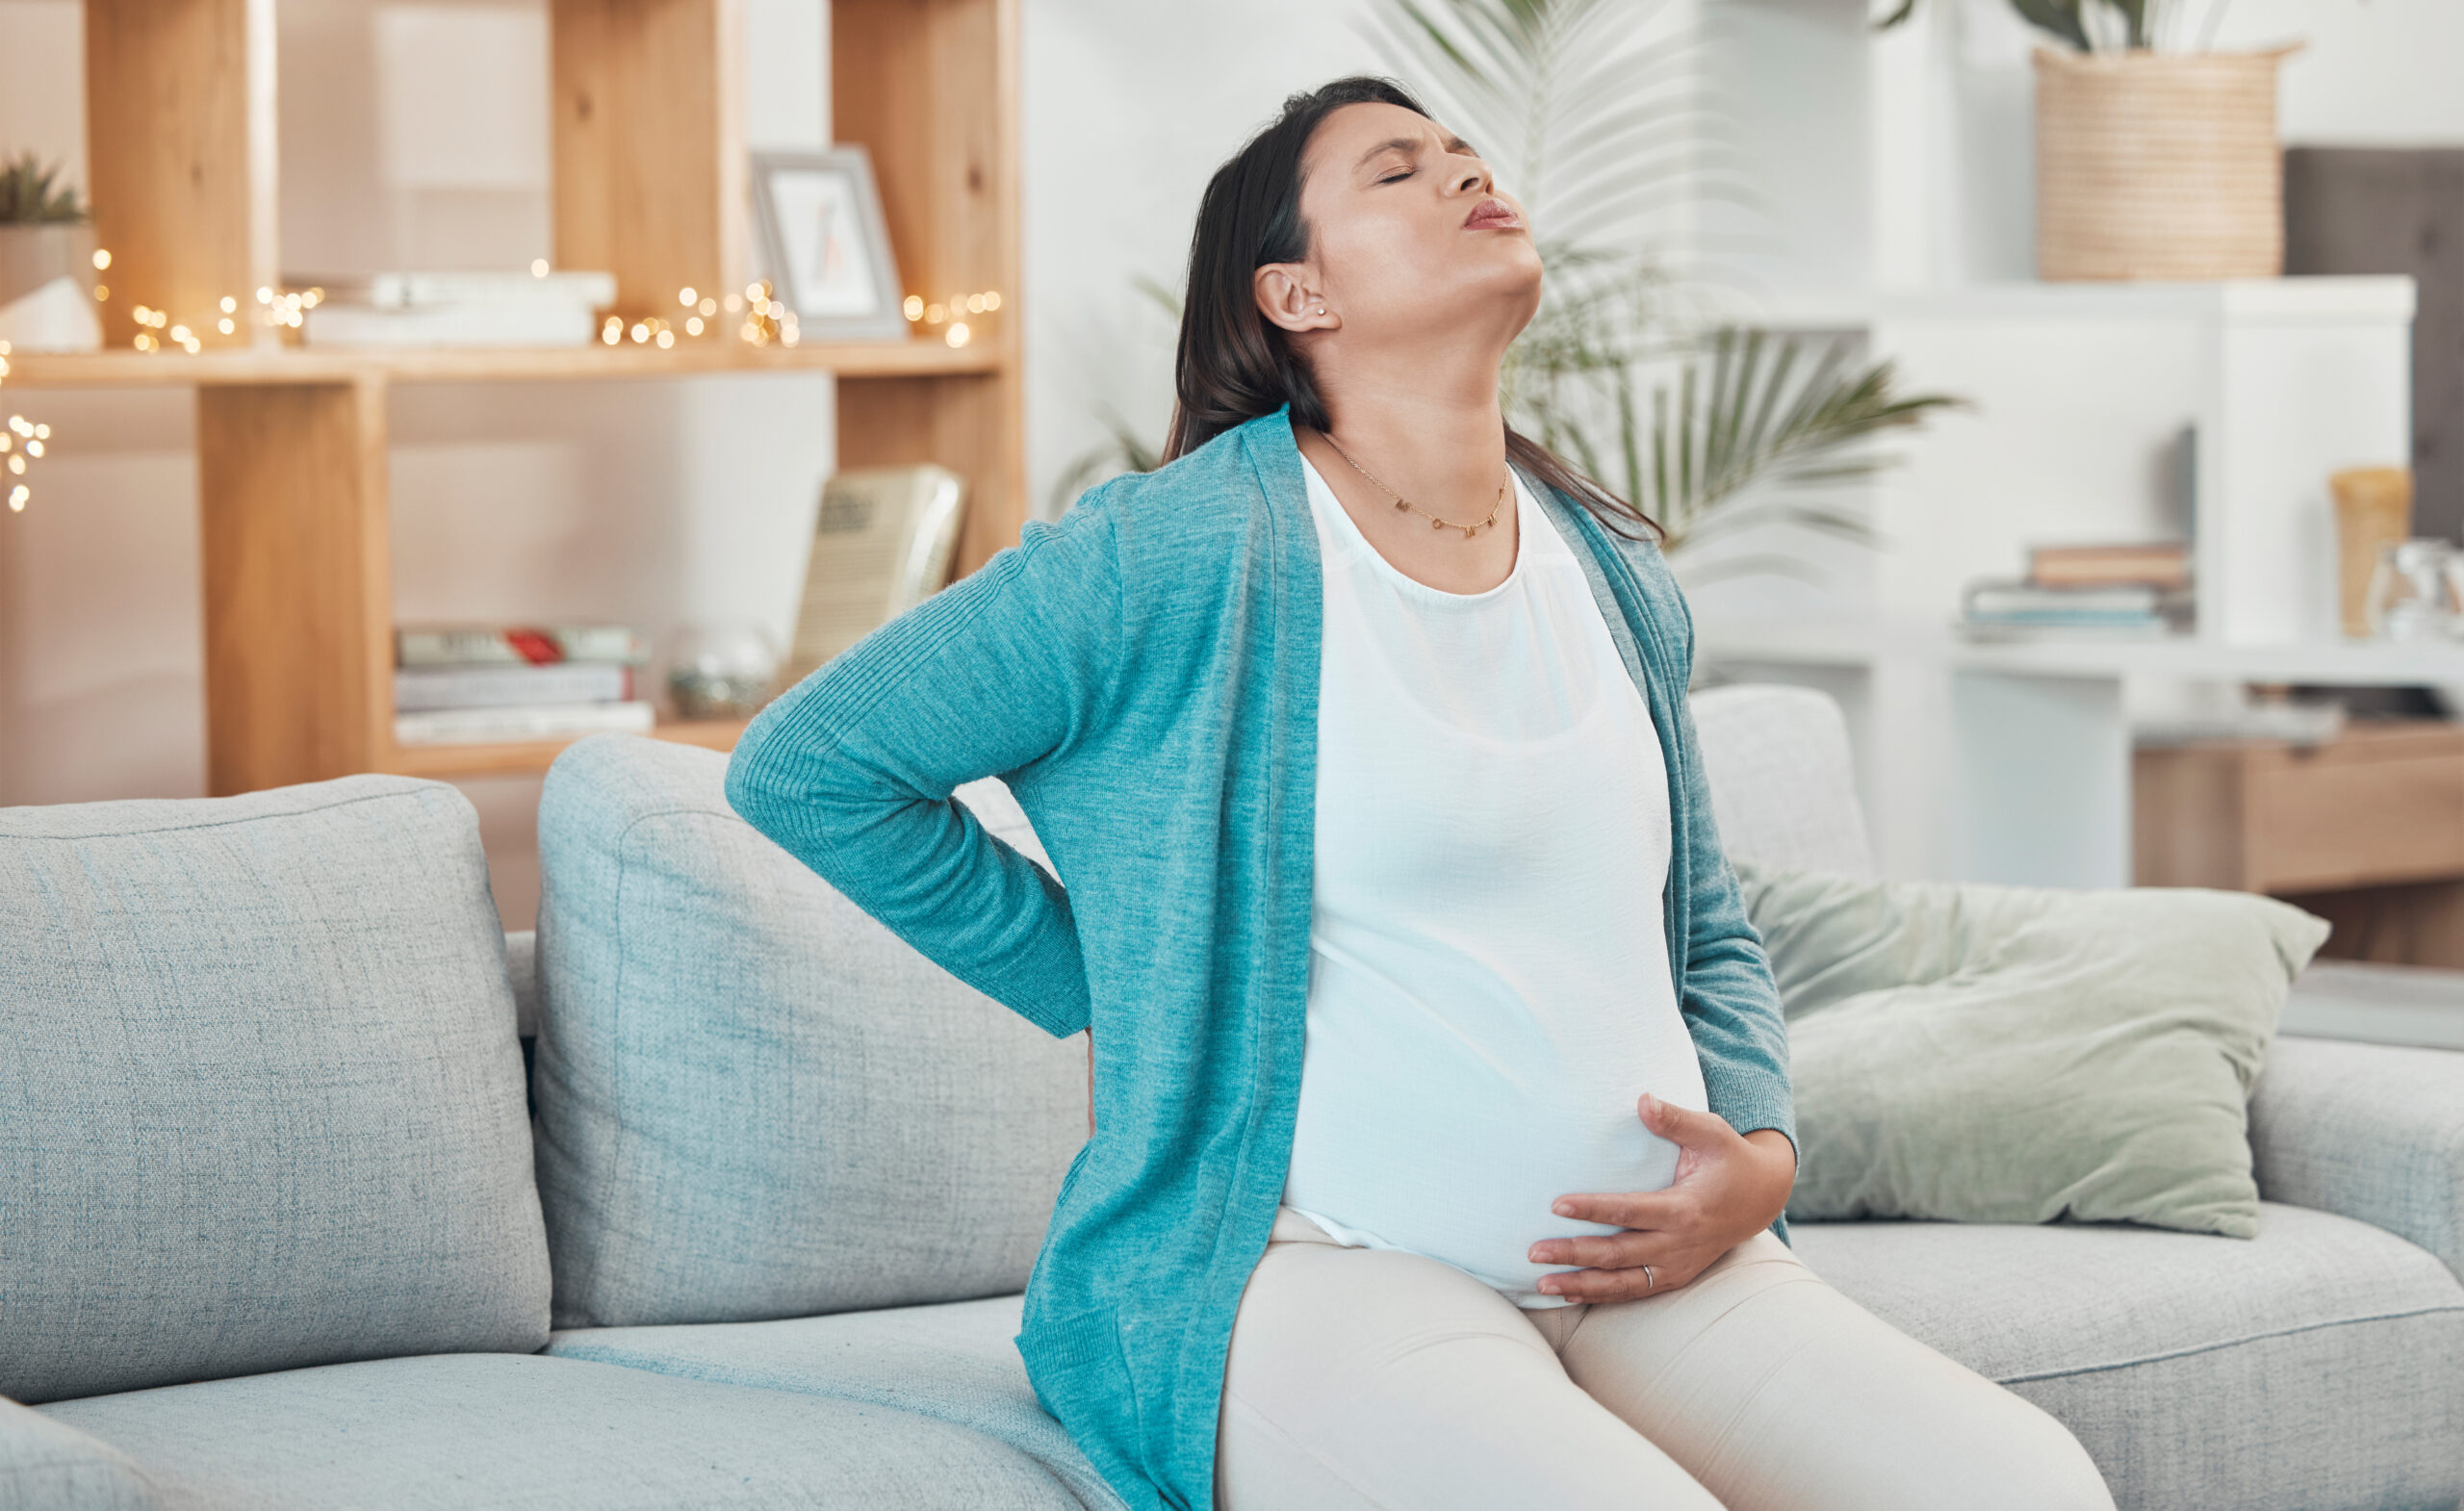 pregnant woman breathing and stomach pain on sofa 2022 12 23 01 00 17 utc scaled